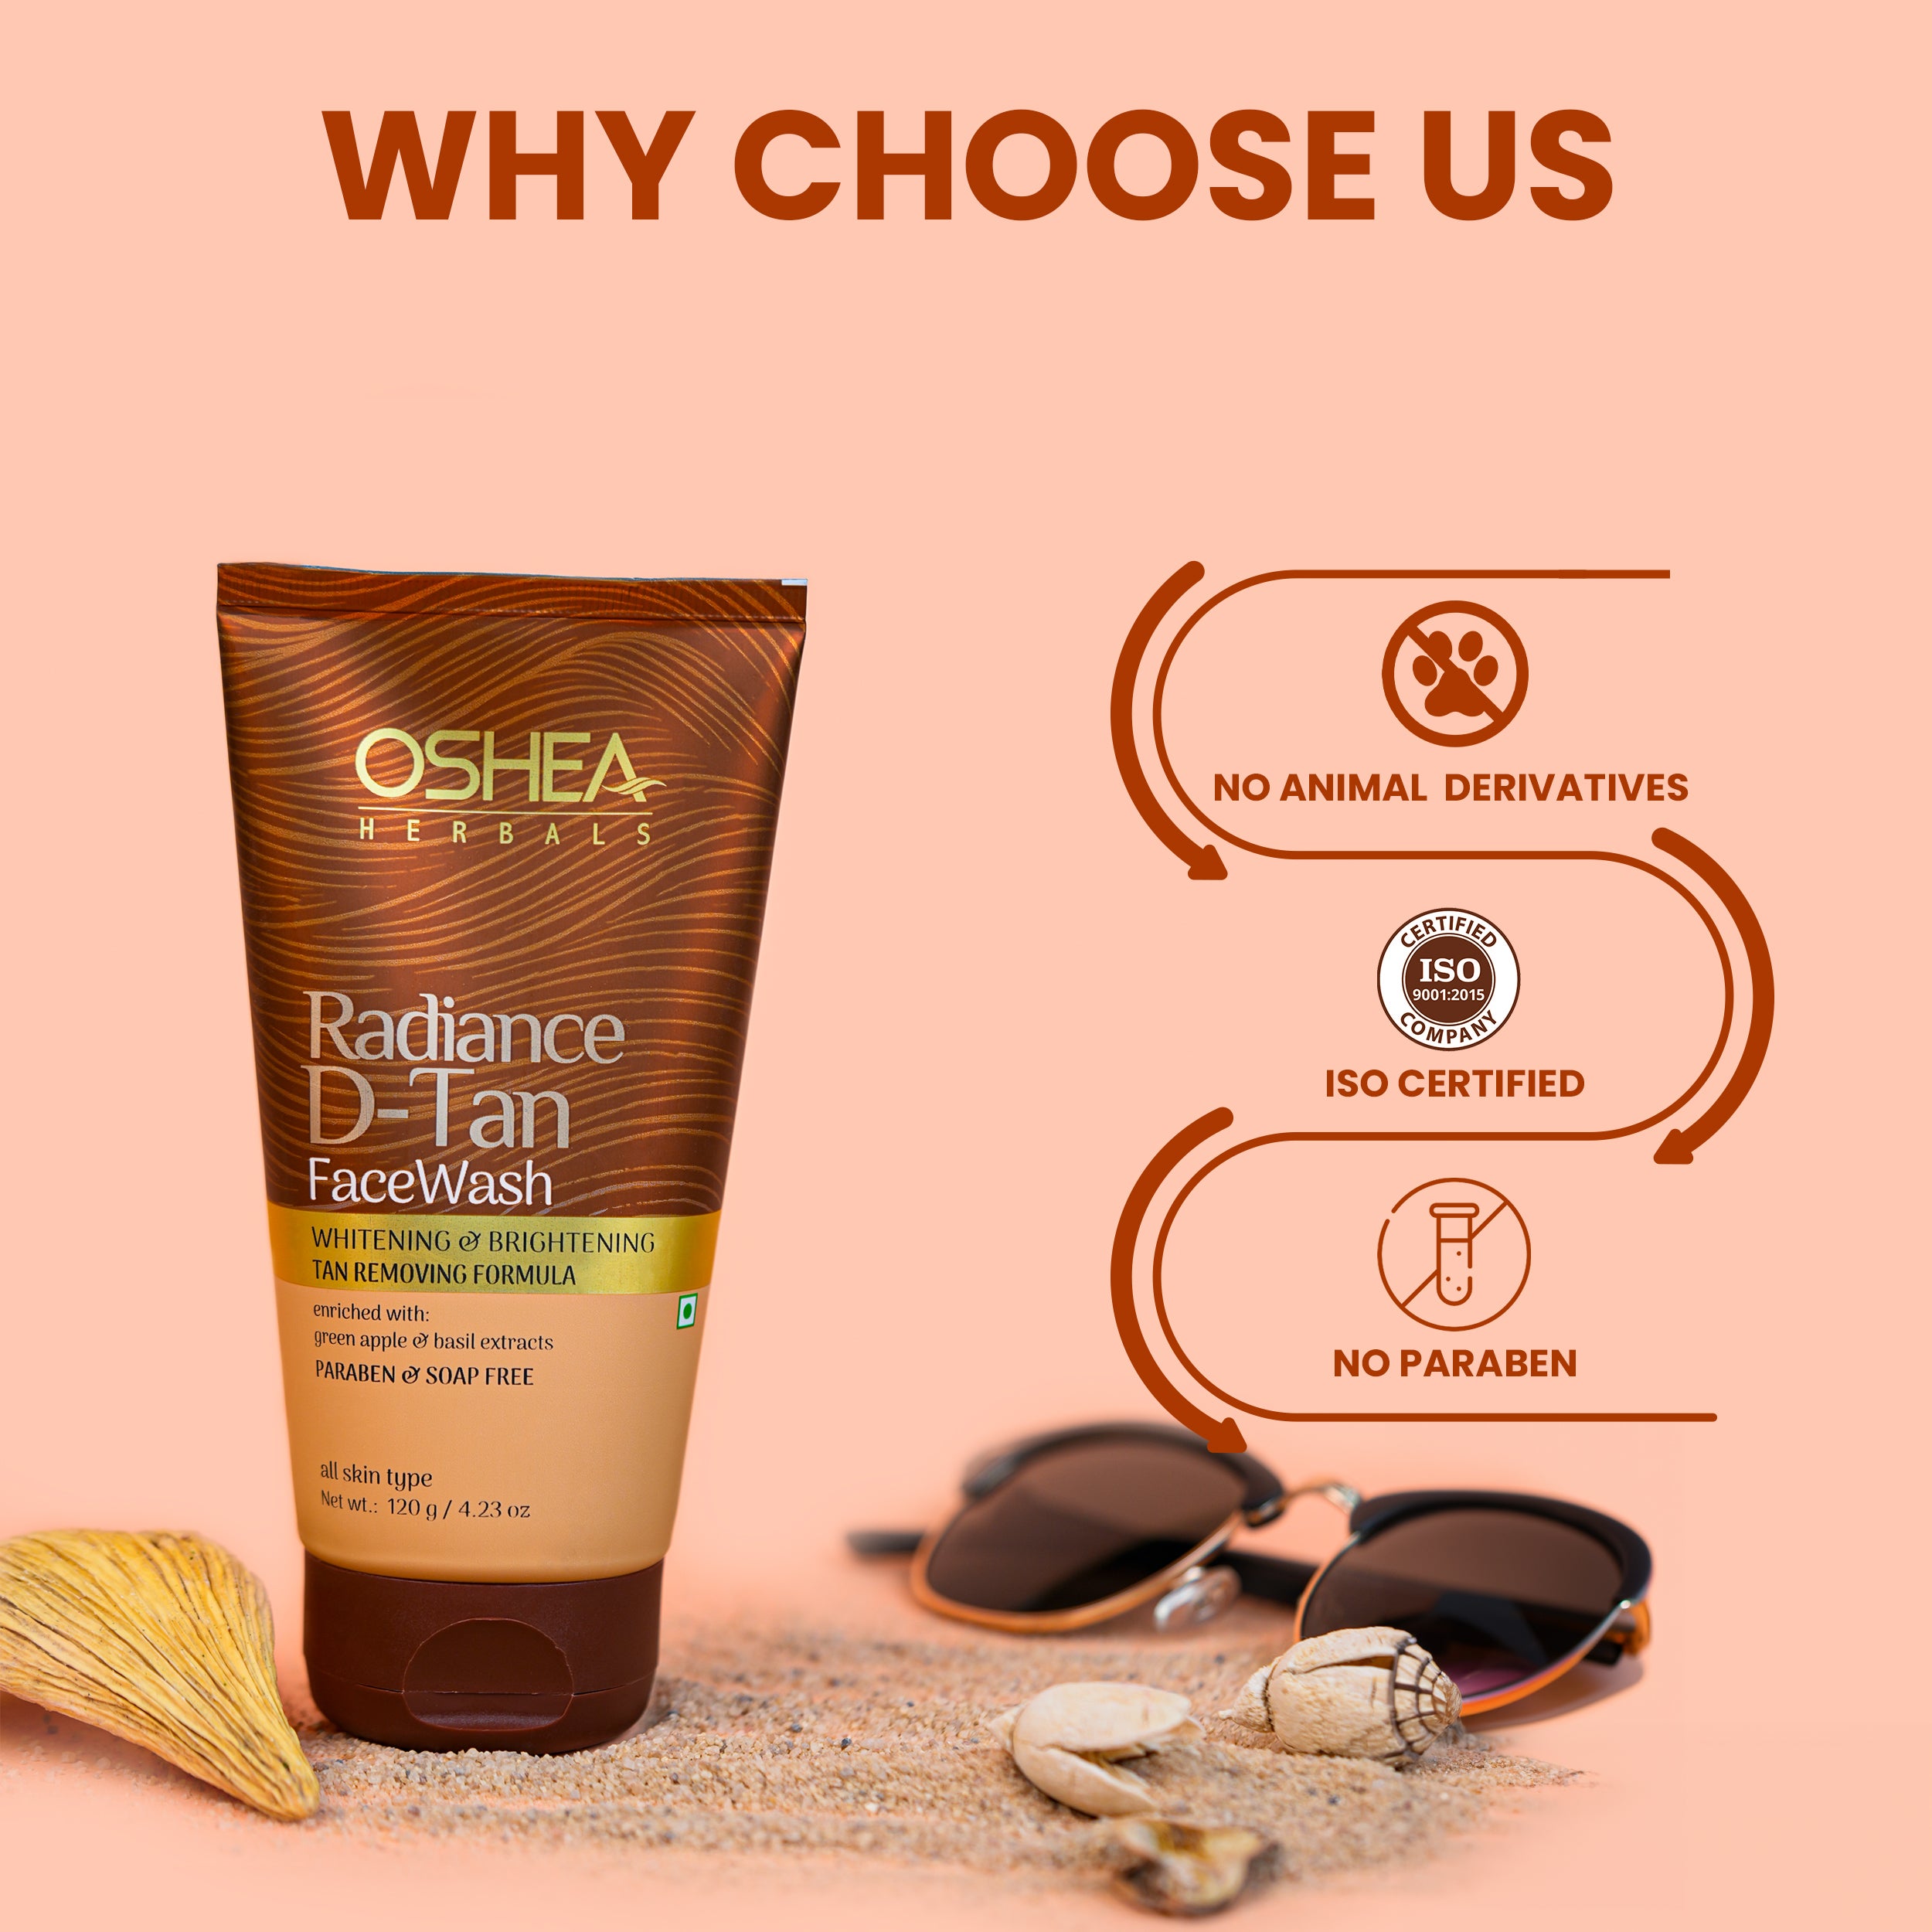 Why Choose Us Radiance D-Tan Face Wash Oshea Herbals